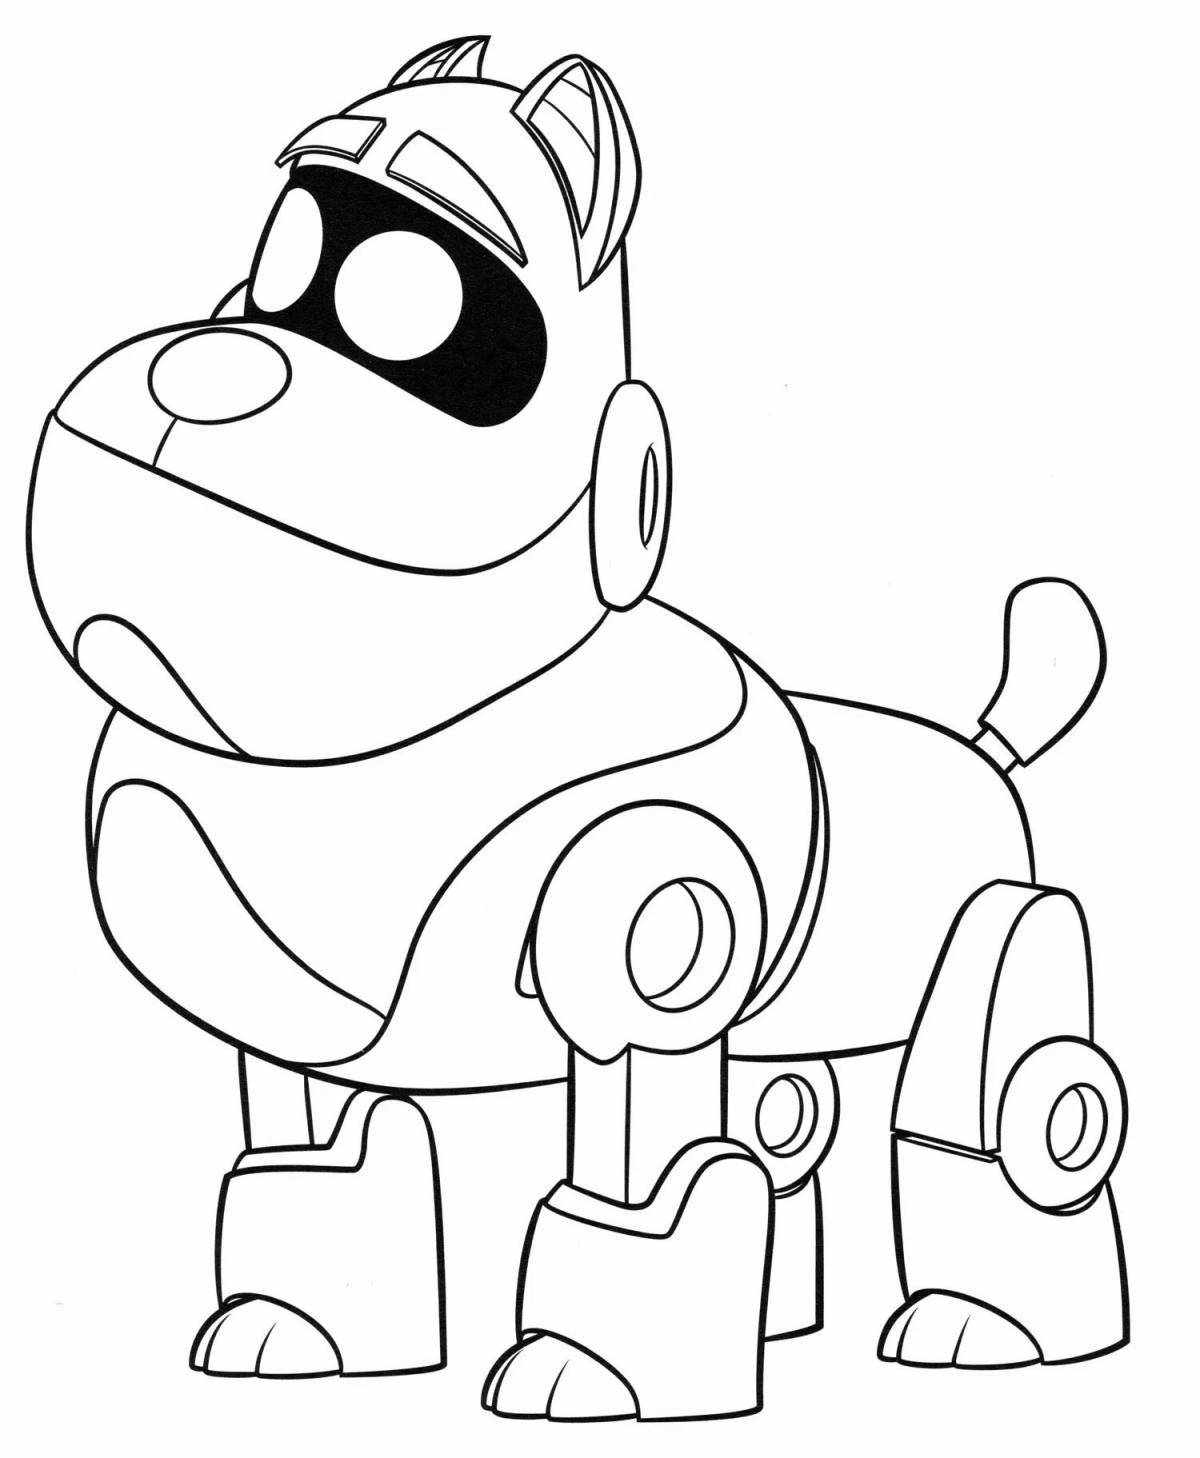 Robodog marvelous coloring book